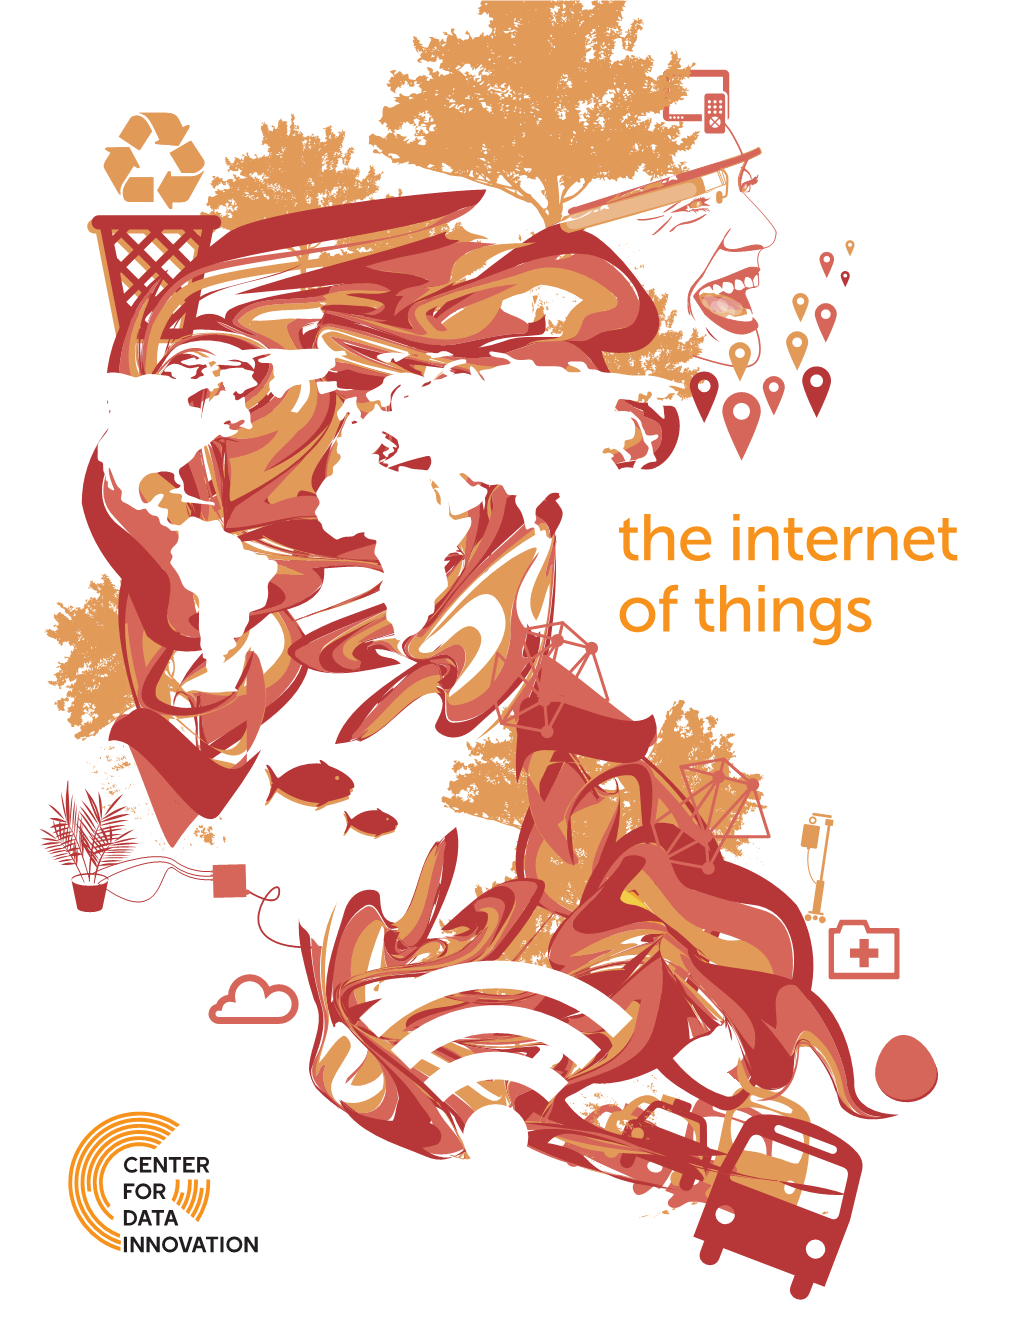 The Internet of Things